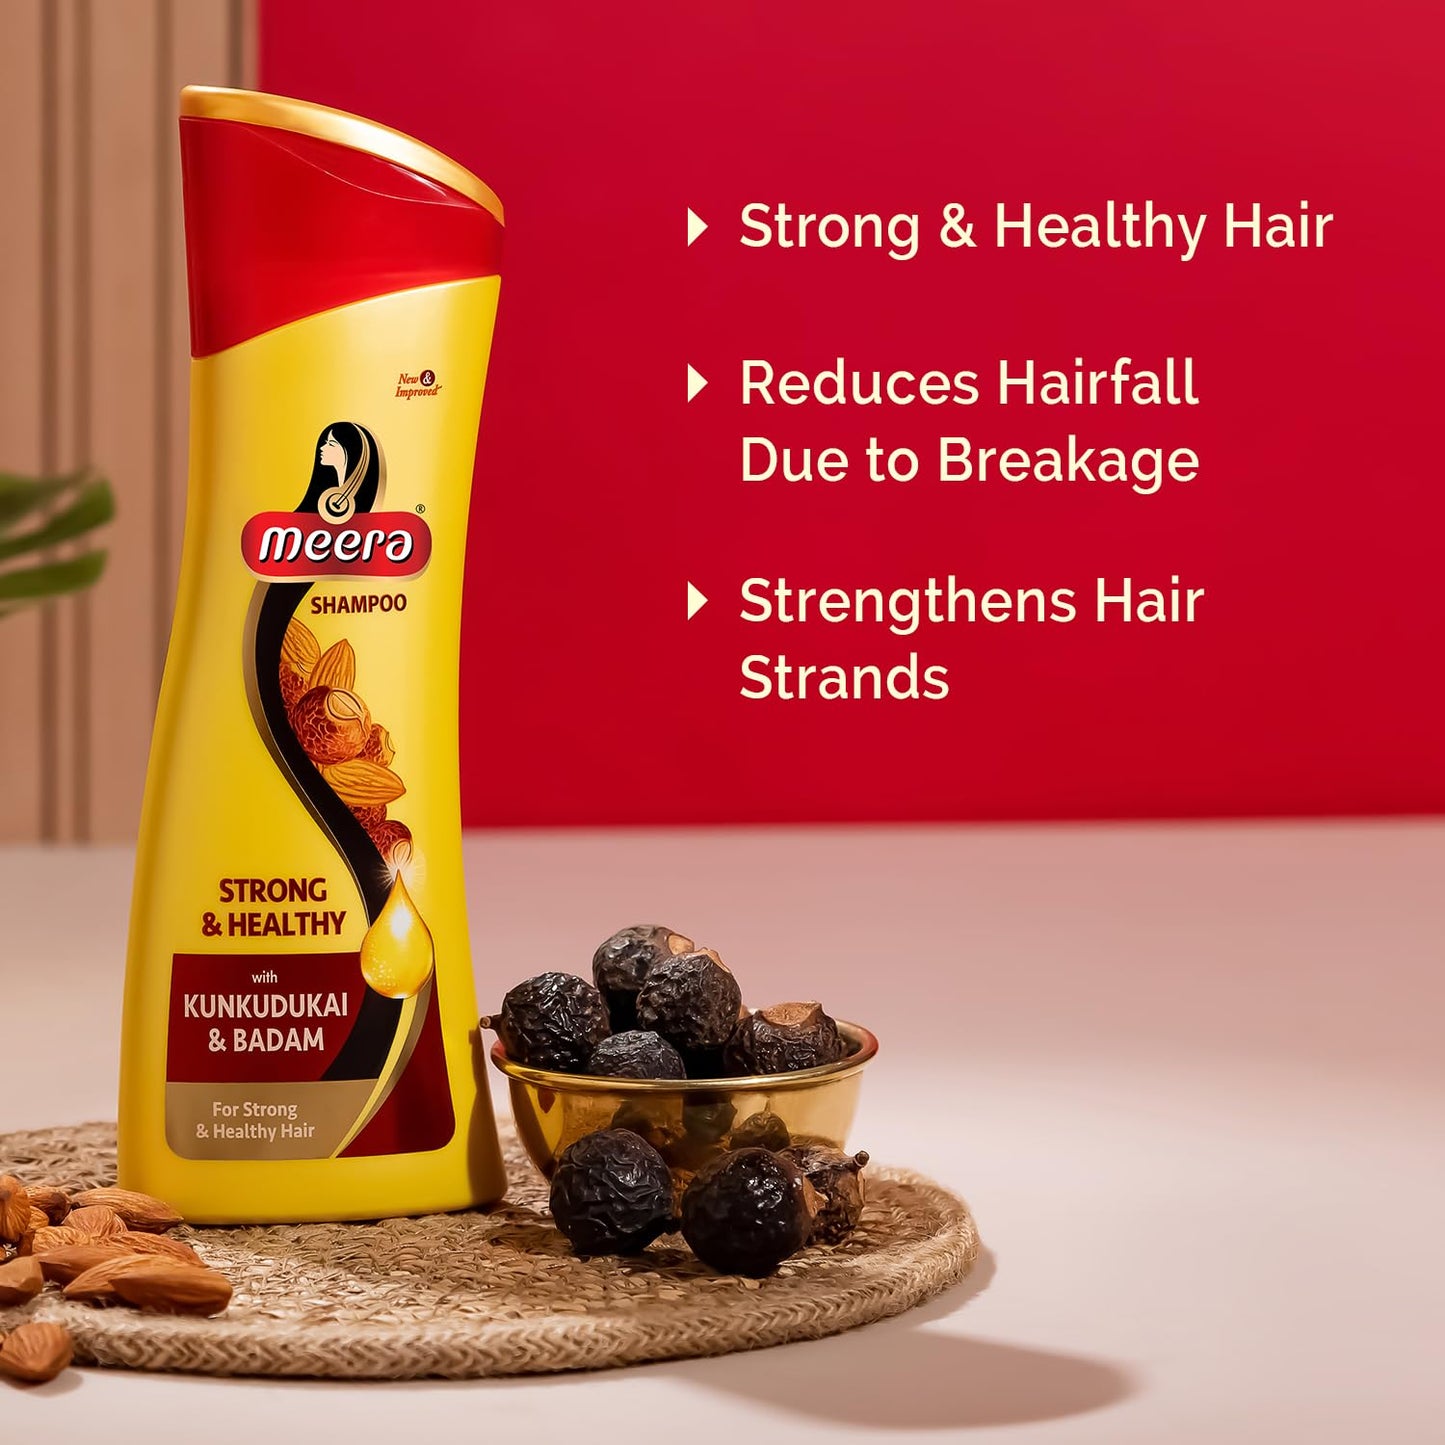 Meera Strong & Healthy Shampoo 180ml Pack Of 3